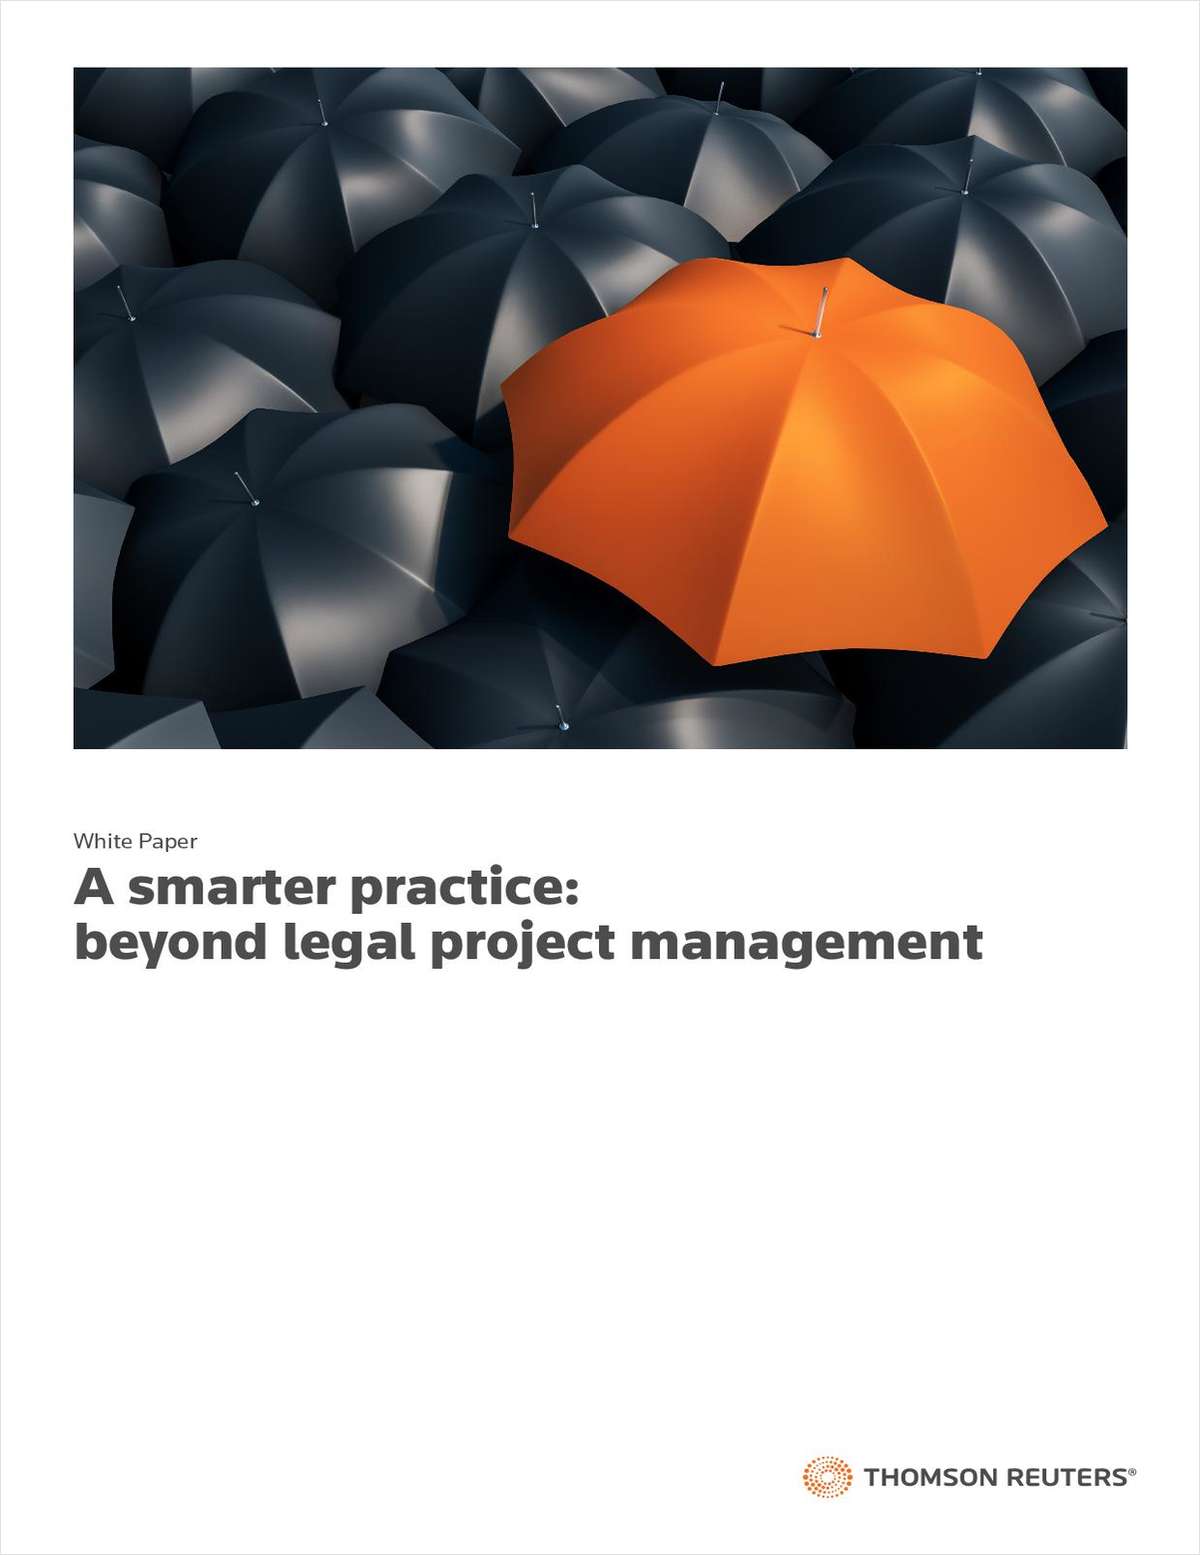 As the market changes, legal clients are increasingly swayed by consistent service delivery and the technology and services that drive it. But today’s LPM solutions are inadequate to fully address the challenges firms face. Download this white paper and learn how your firm can embrace efficiency, project management, and productivity systems designed to maximise profit and minimise waste.